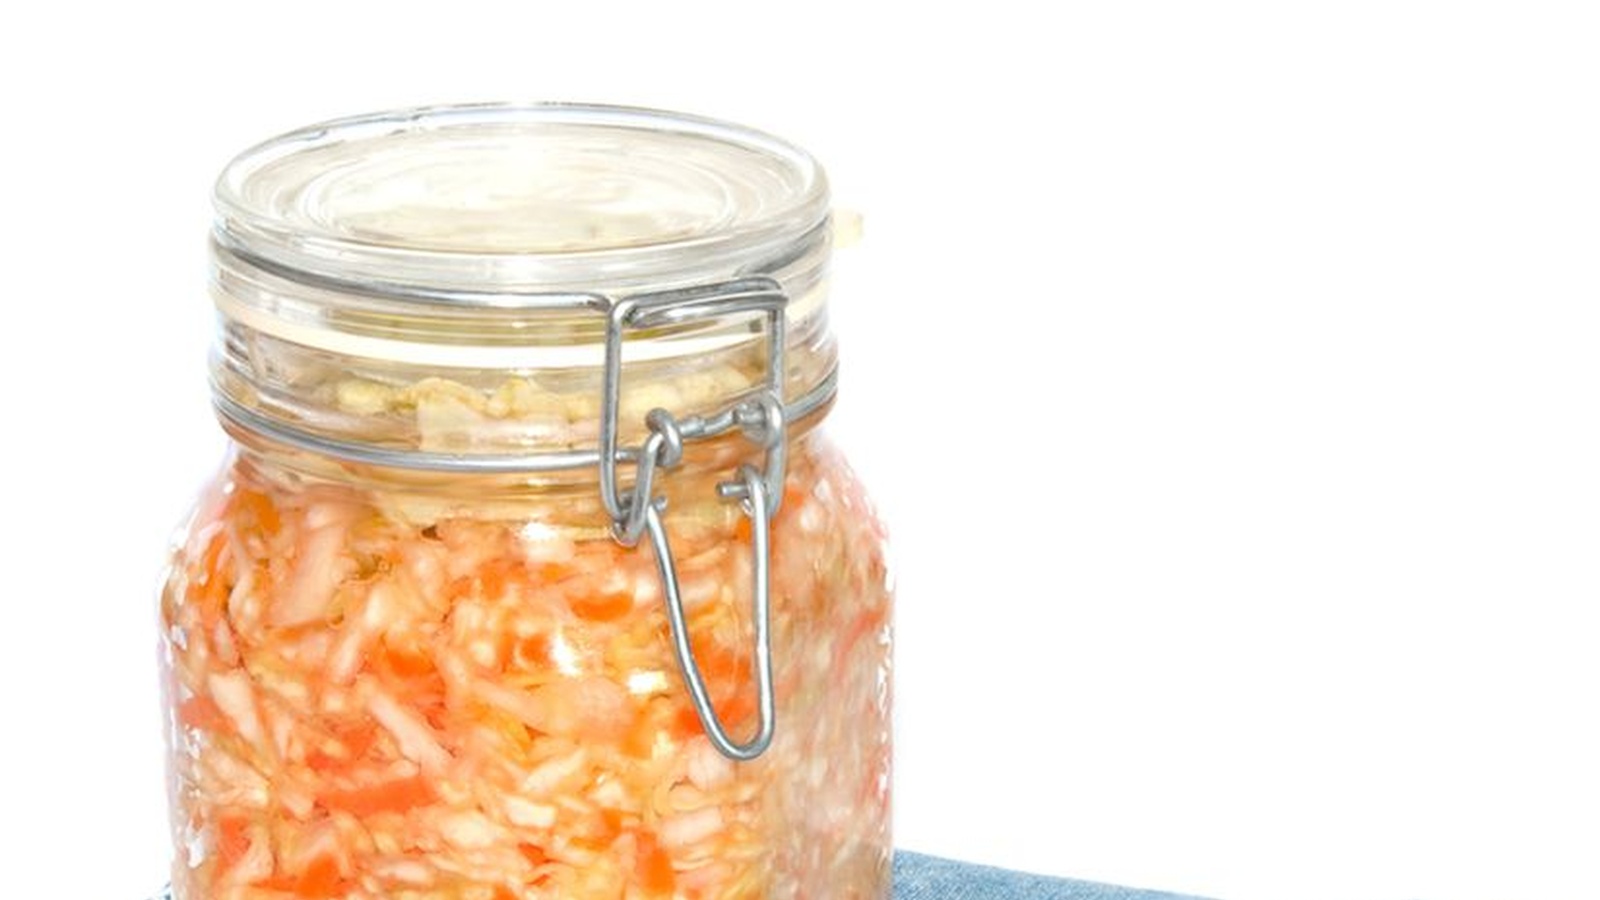 7 Things You Need To Know About Fermented Foods